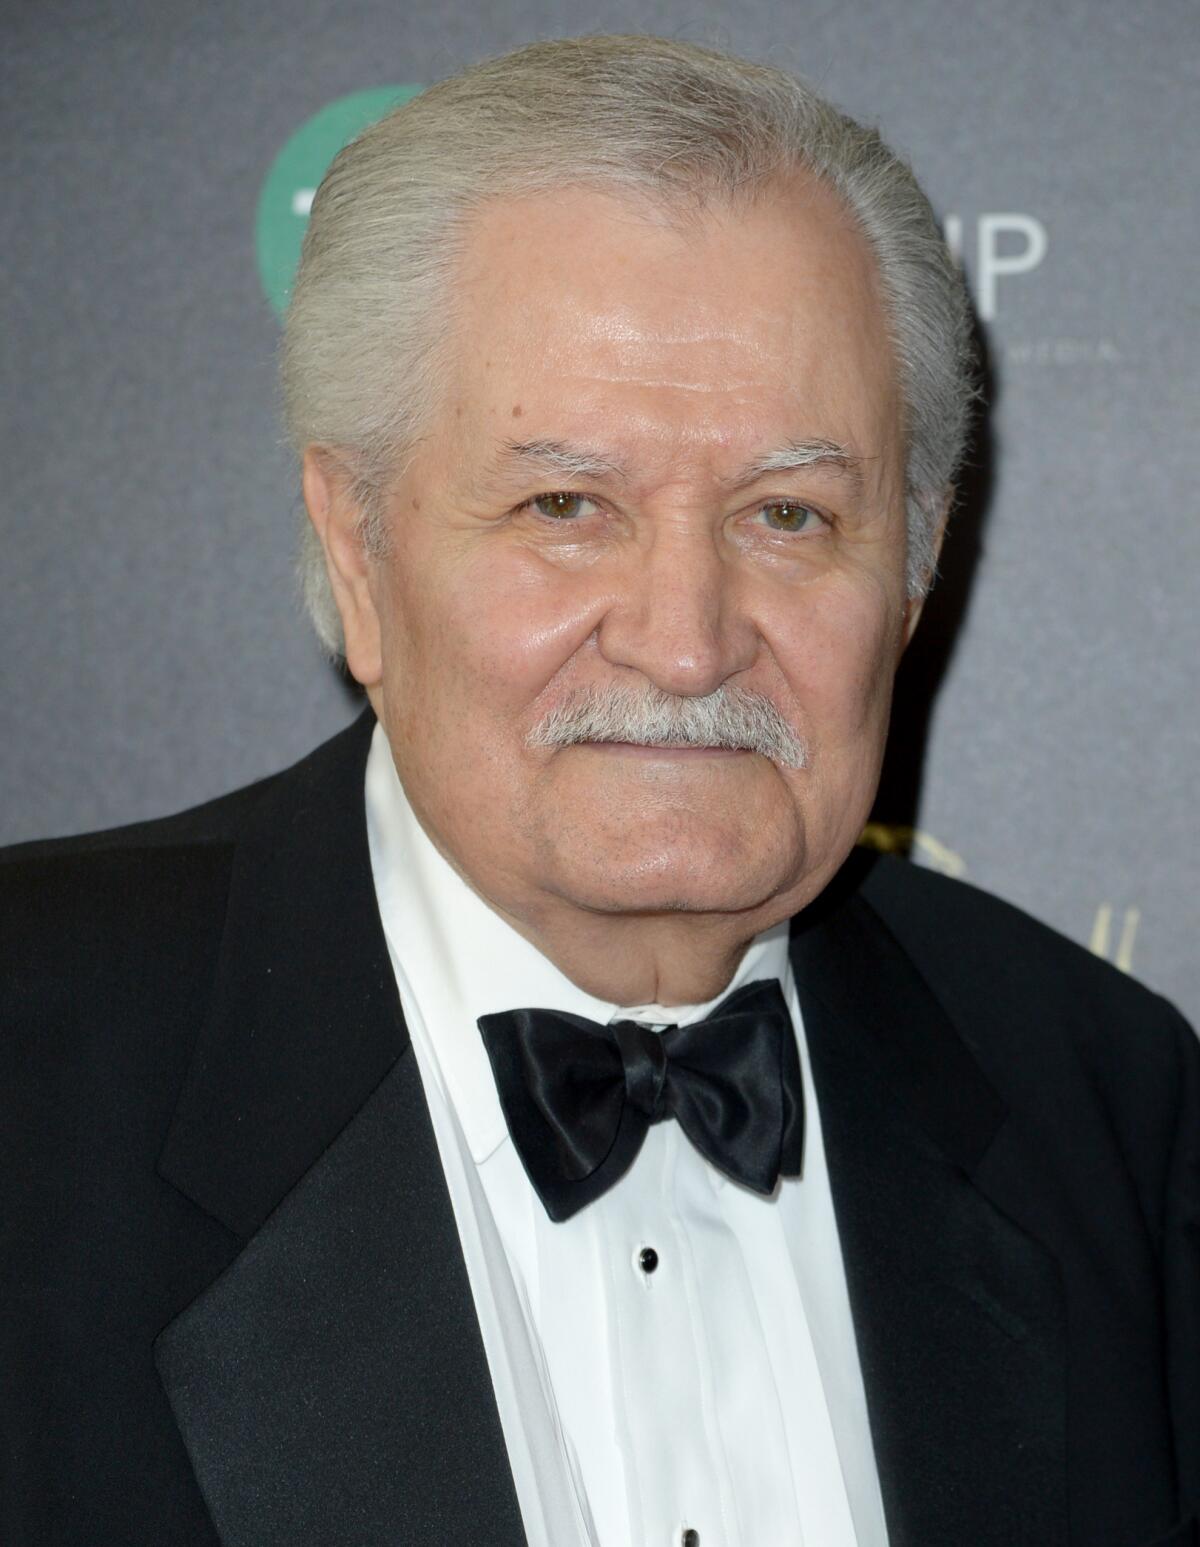 An older man with white hair and a mustache wears a tuxedo